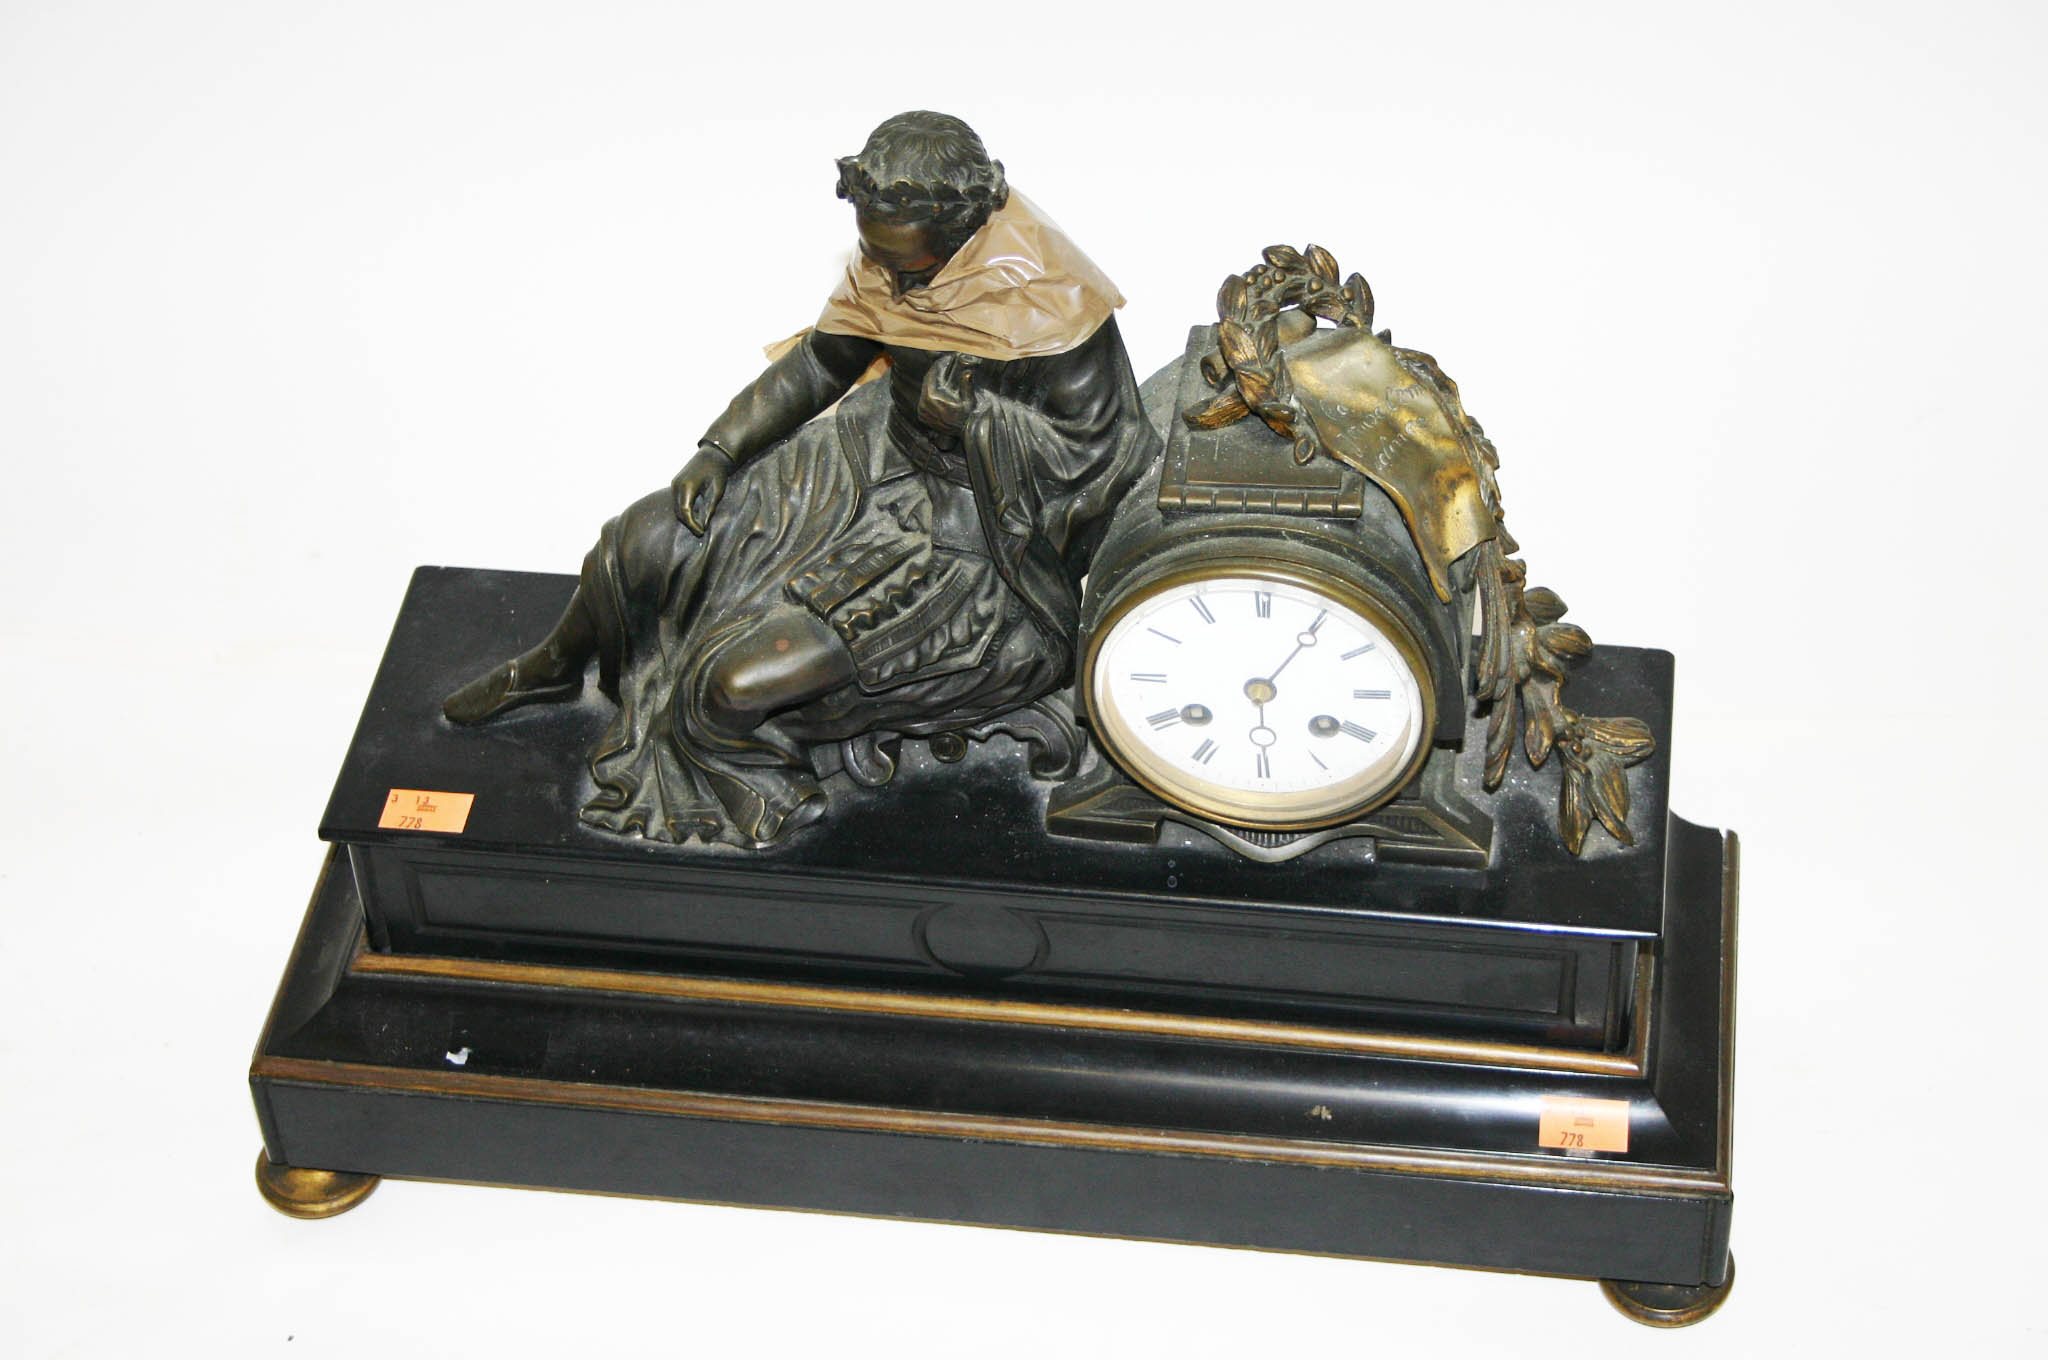 A FRENCH BRONZE AND POLISHED BLACK MARBLE MANTEL CLOCK, 19th Century, the top surmounted with a